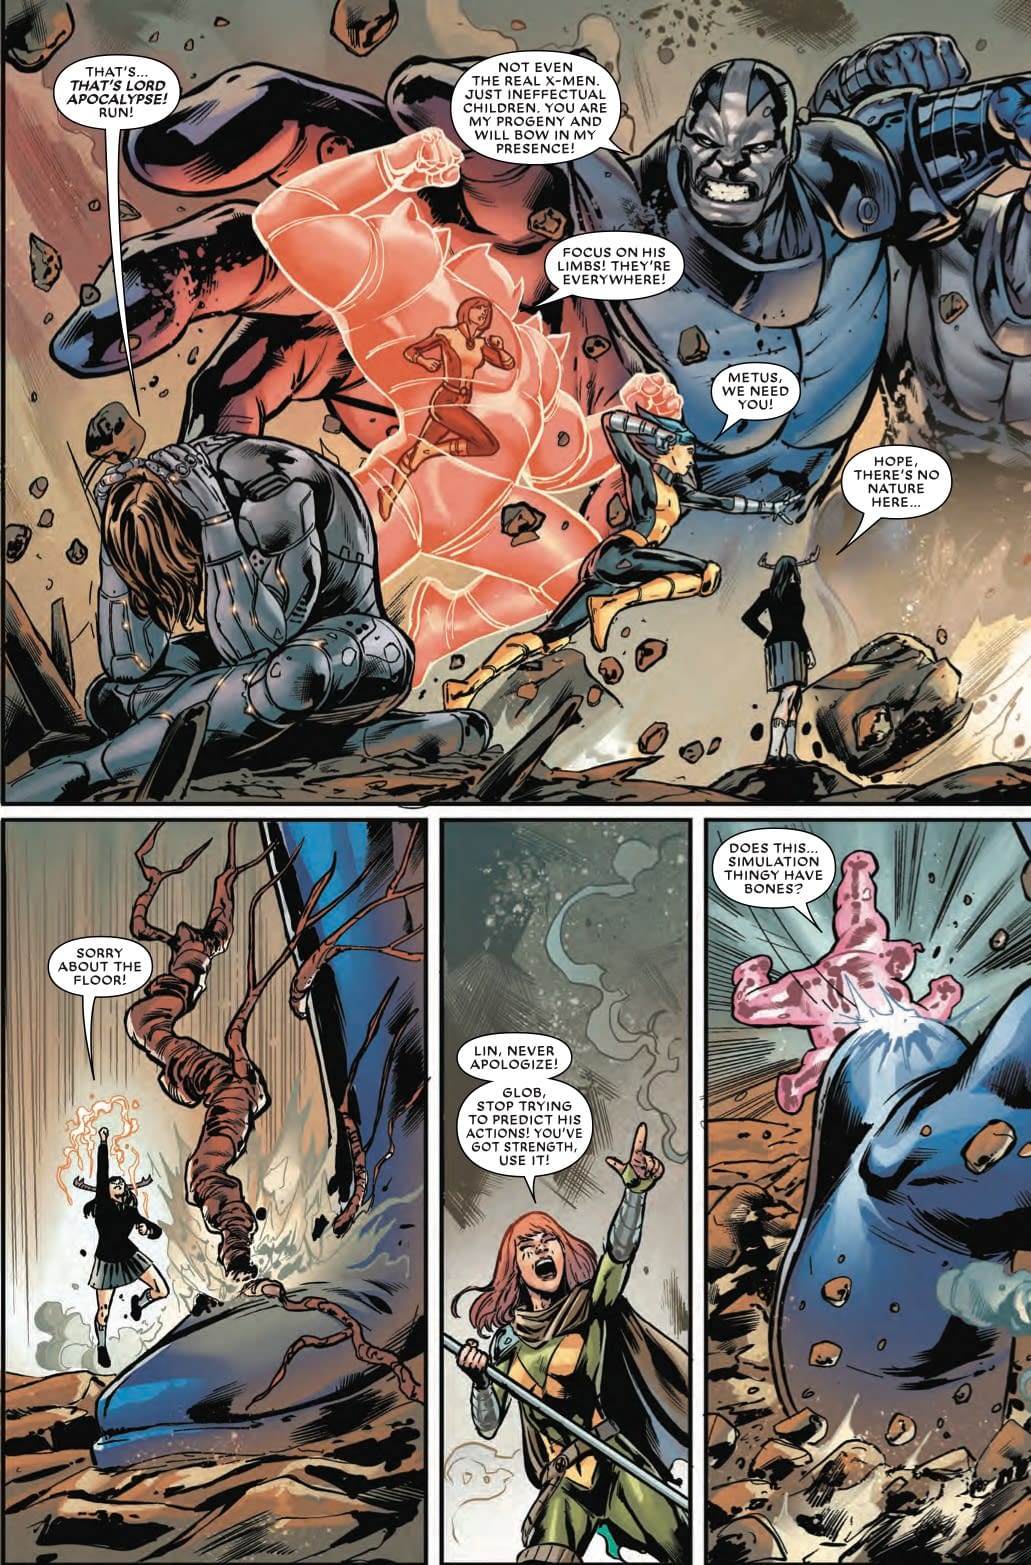 Glob Herman's Fantastic New Catchphrase in Next Week's X-Men: The Exterminated #1